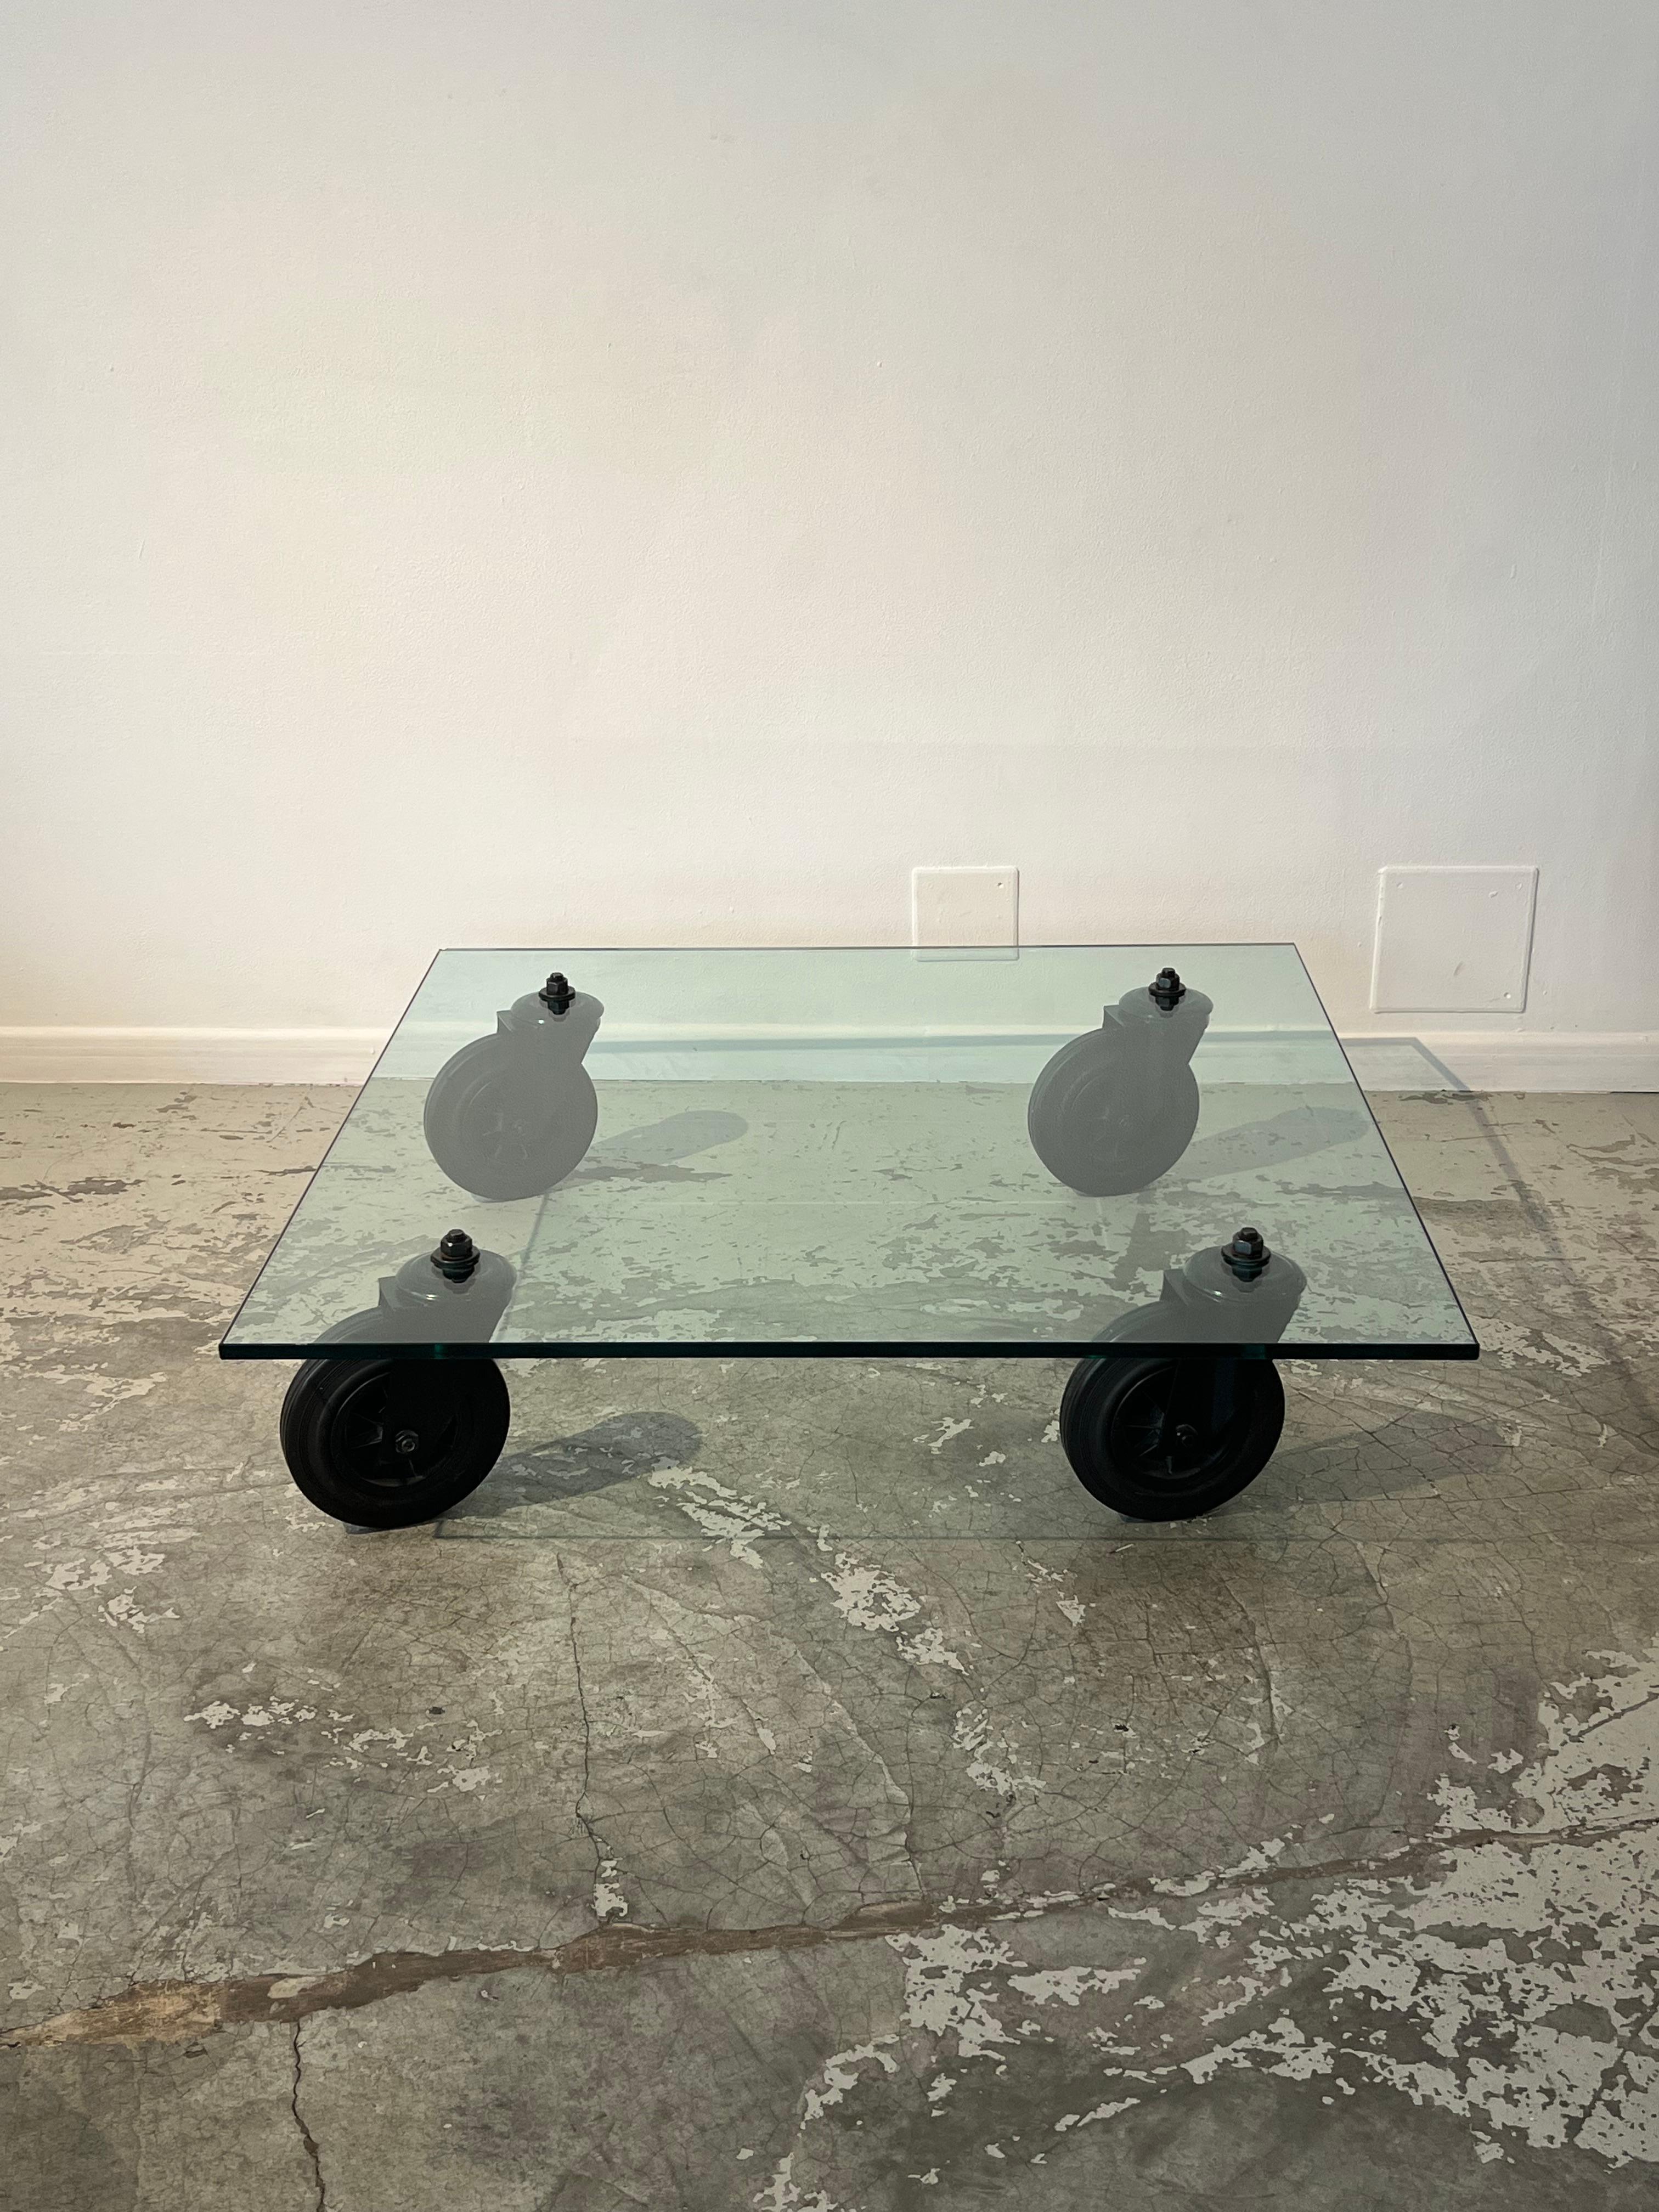 This coffee table was designed by Gae Aulenti for the famous Italian publishing house Fontana Arte. This designer and architect has designed numerous projects, including the interior spaces of the Musée d'Orsay and the Musée Pompidou. In addition to